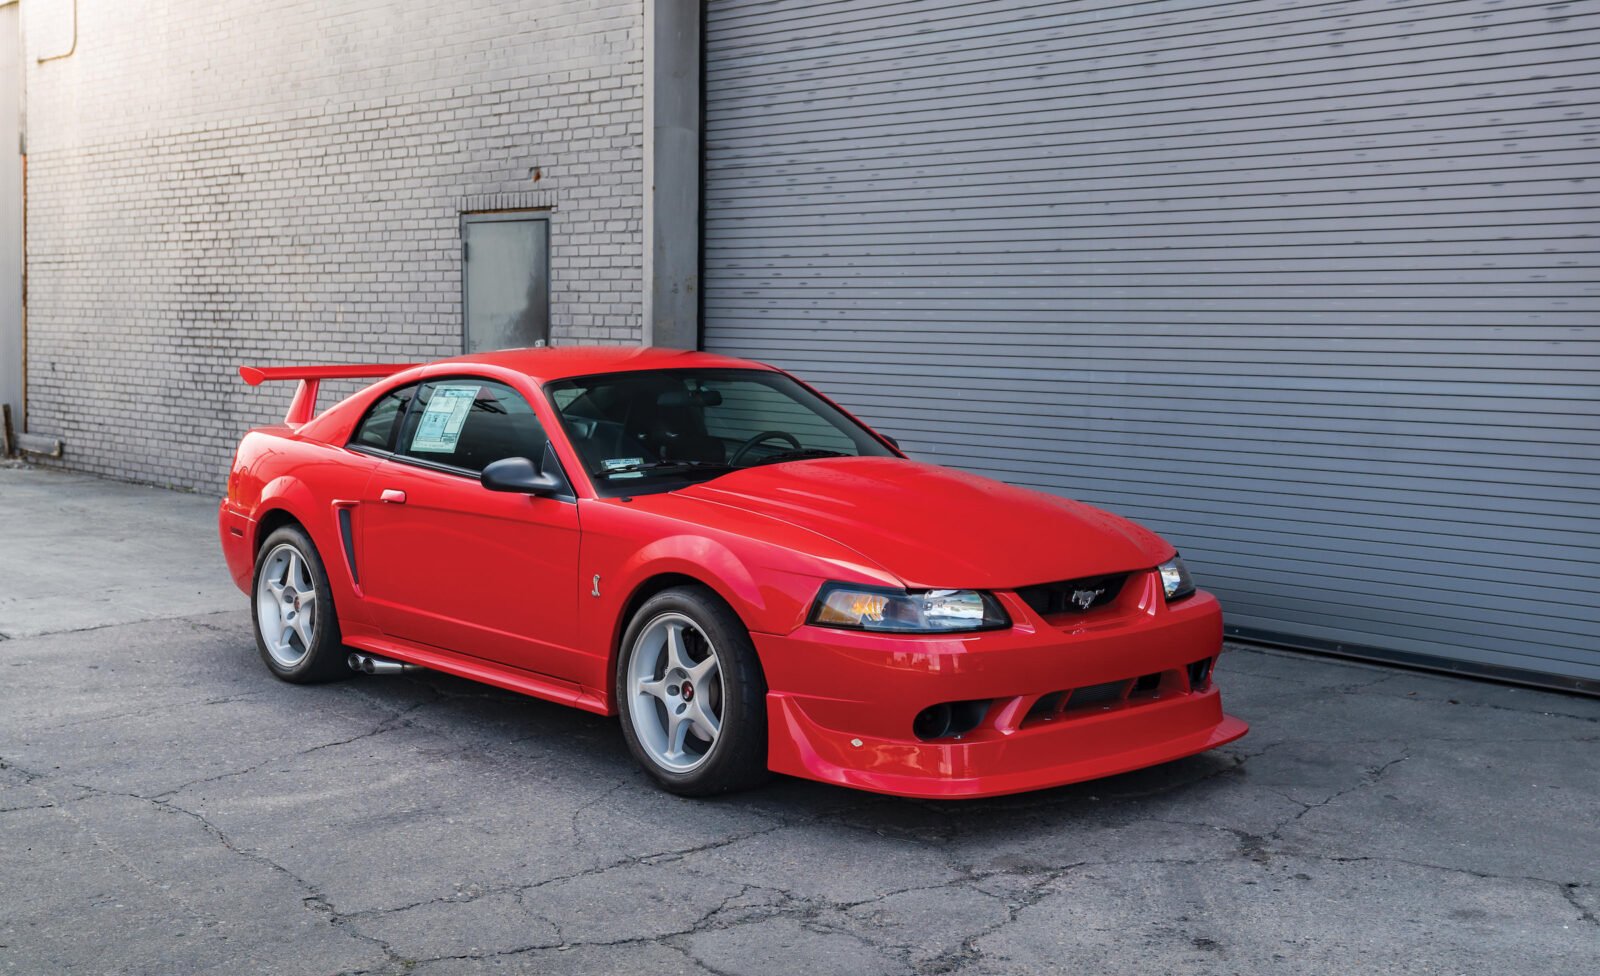 2000 Ford SVT Mustang Cobra R - 385 BHP - 0-60 MPH in 4.4 Seconds